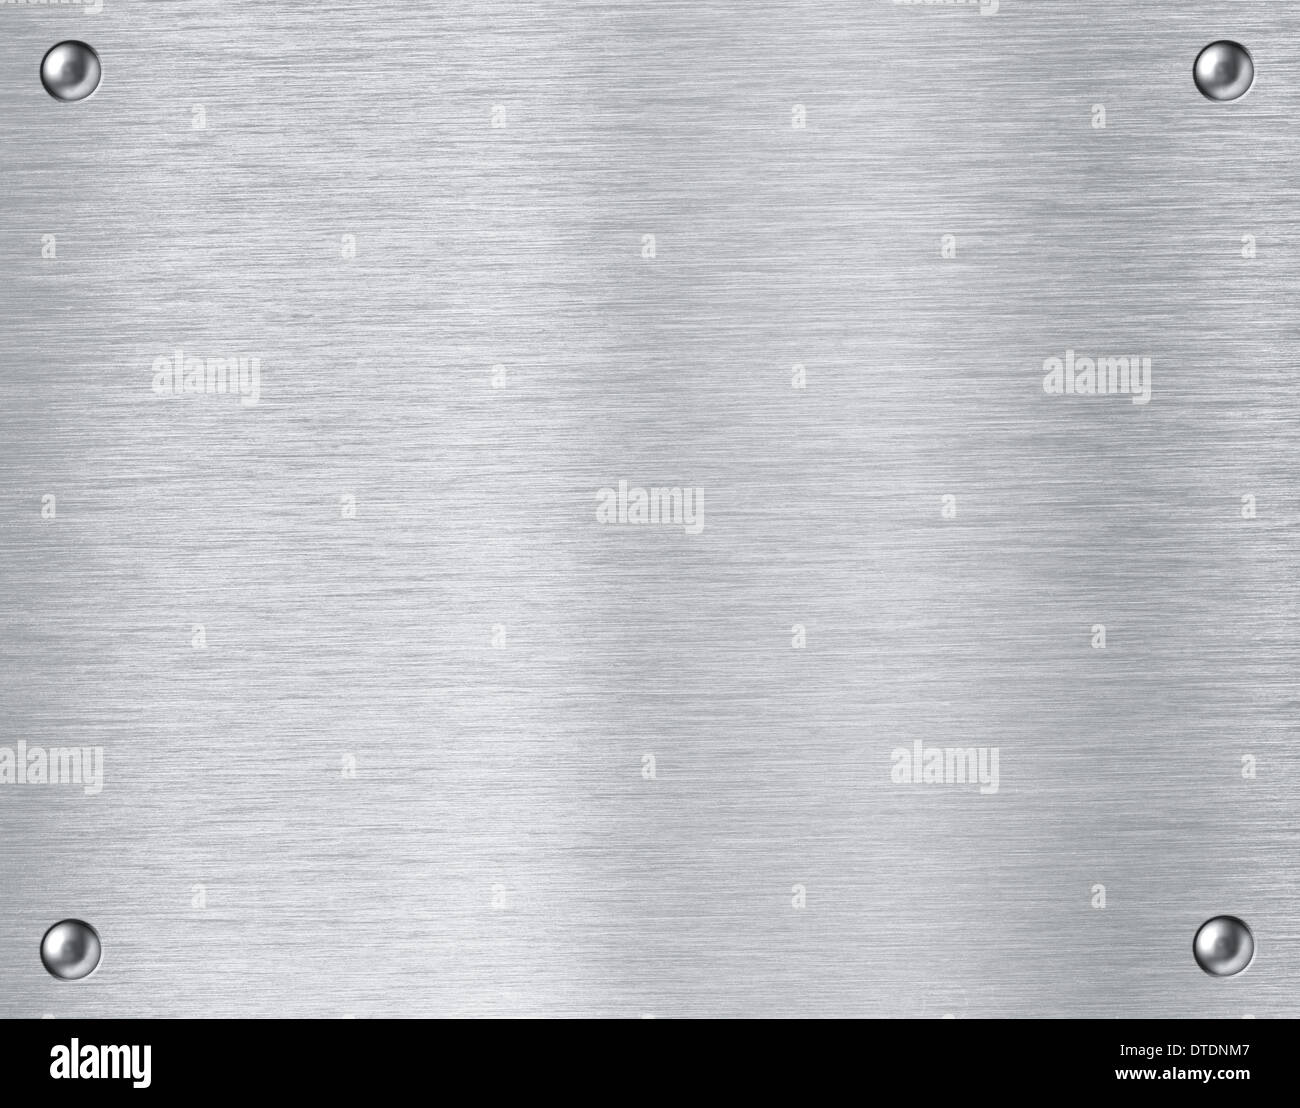 Steel metal textured plate background Stock Photo